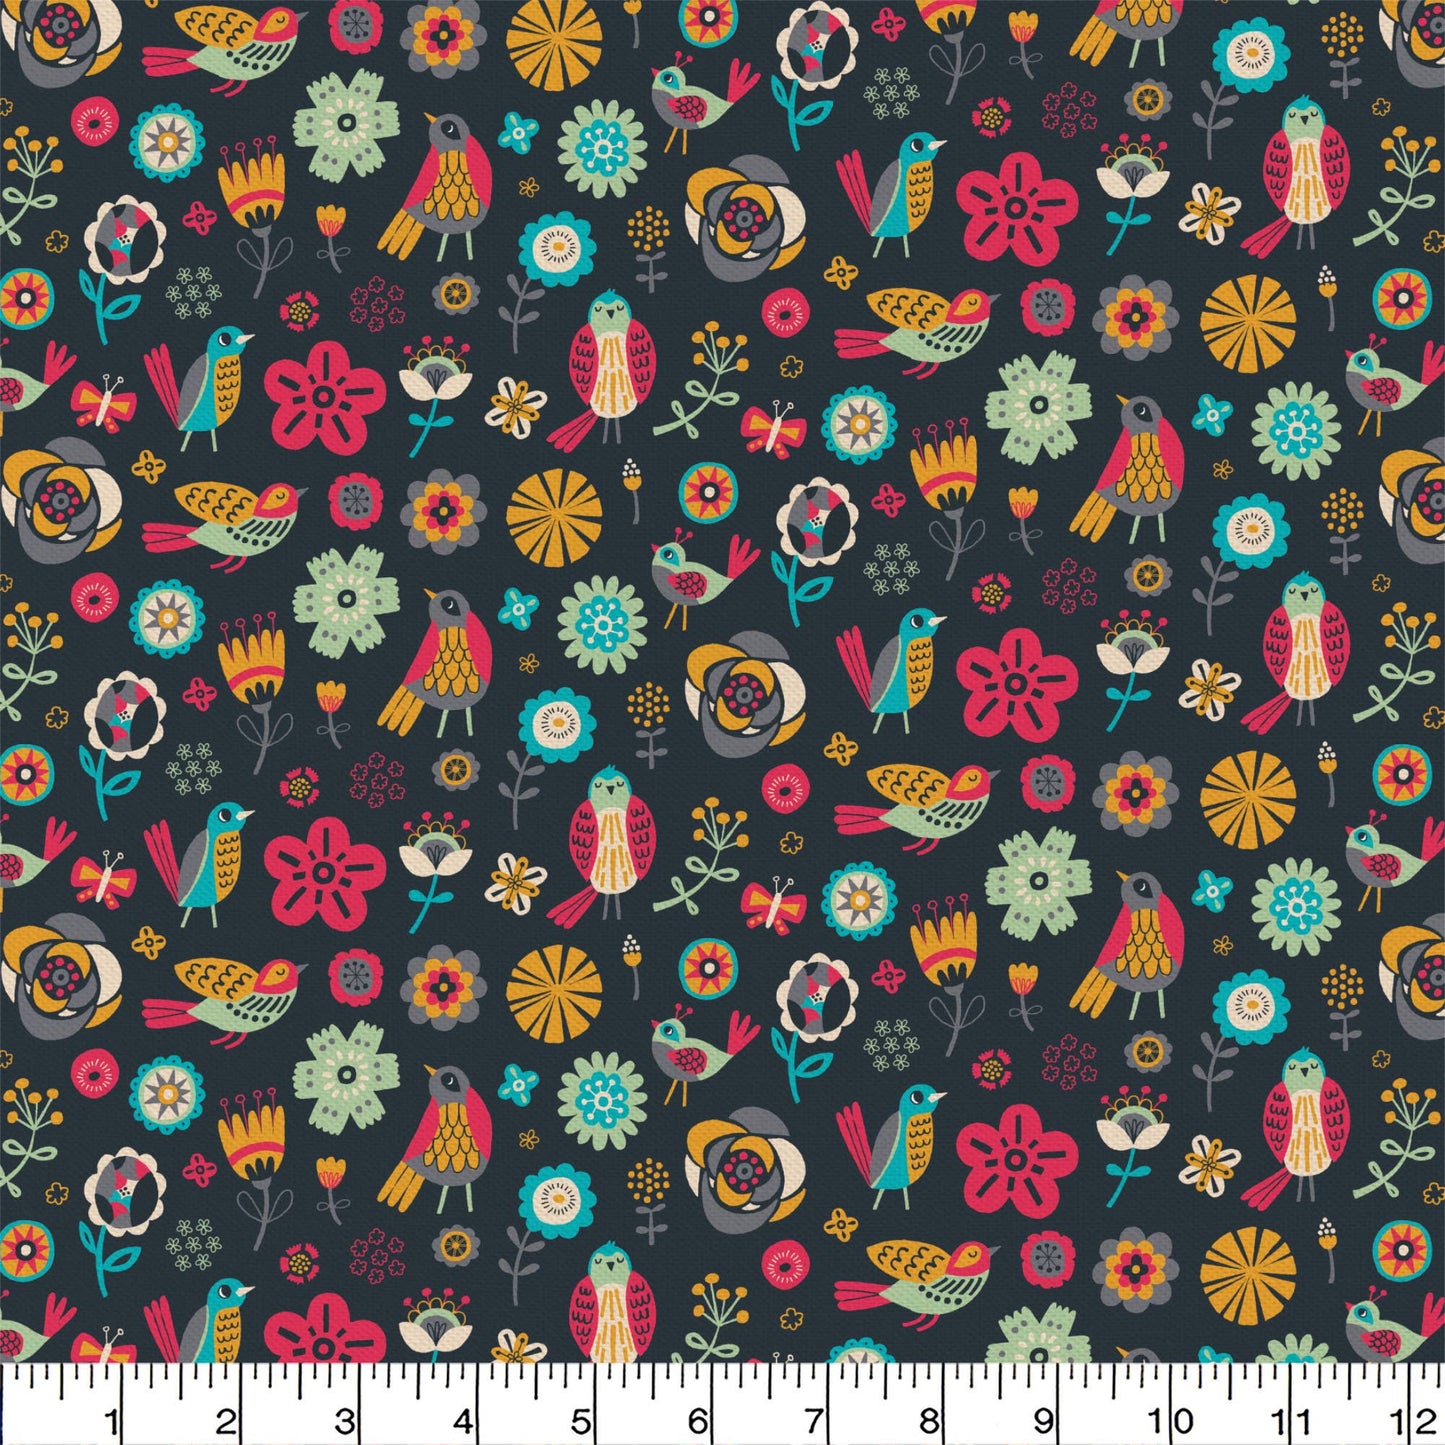 Emma & Mila Collection - Fabric by the Yard-Birds of a Feather - Birds & Flowers- online only